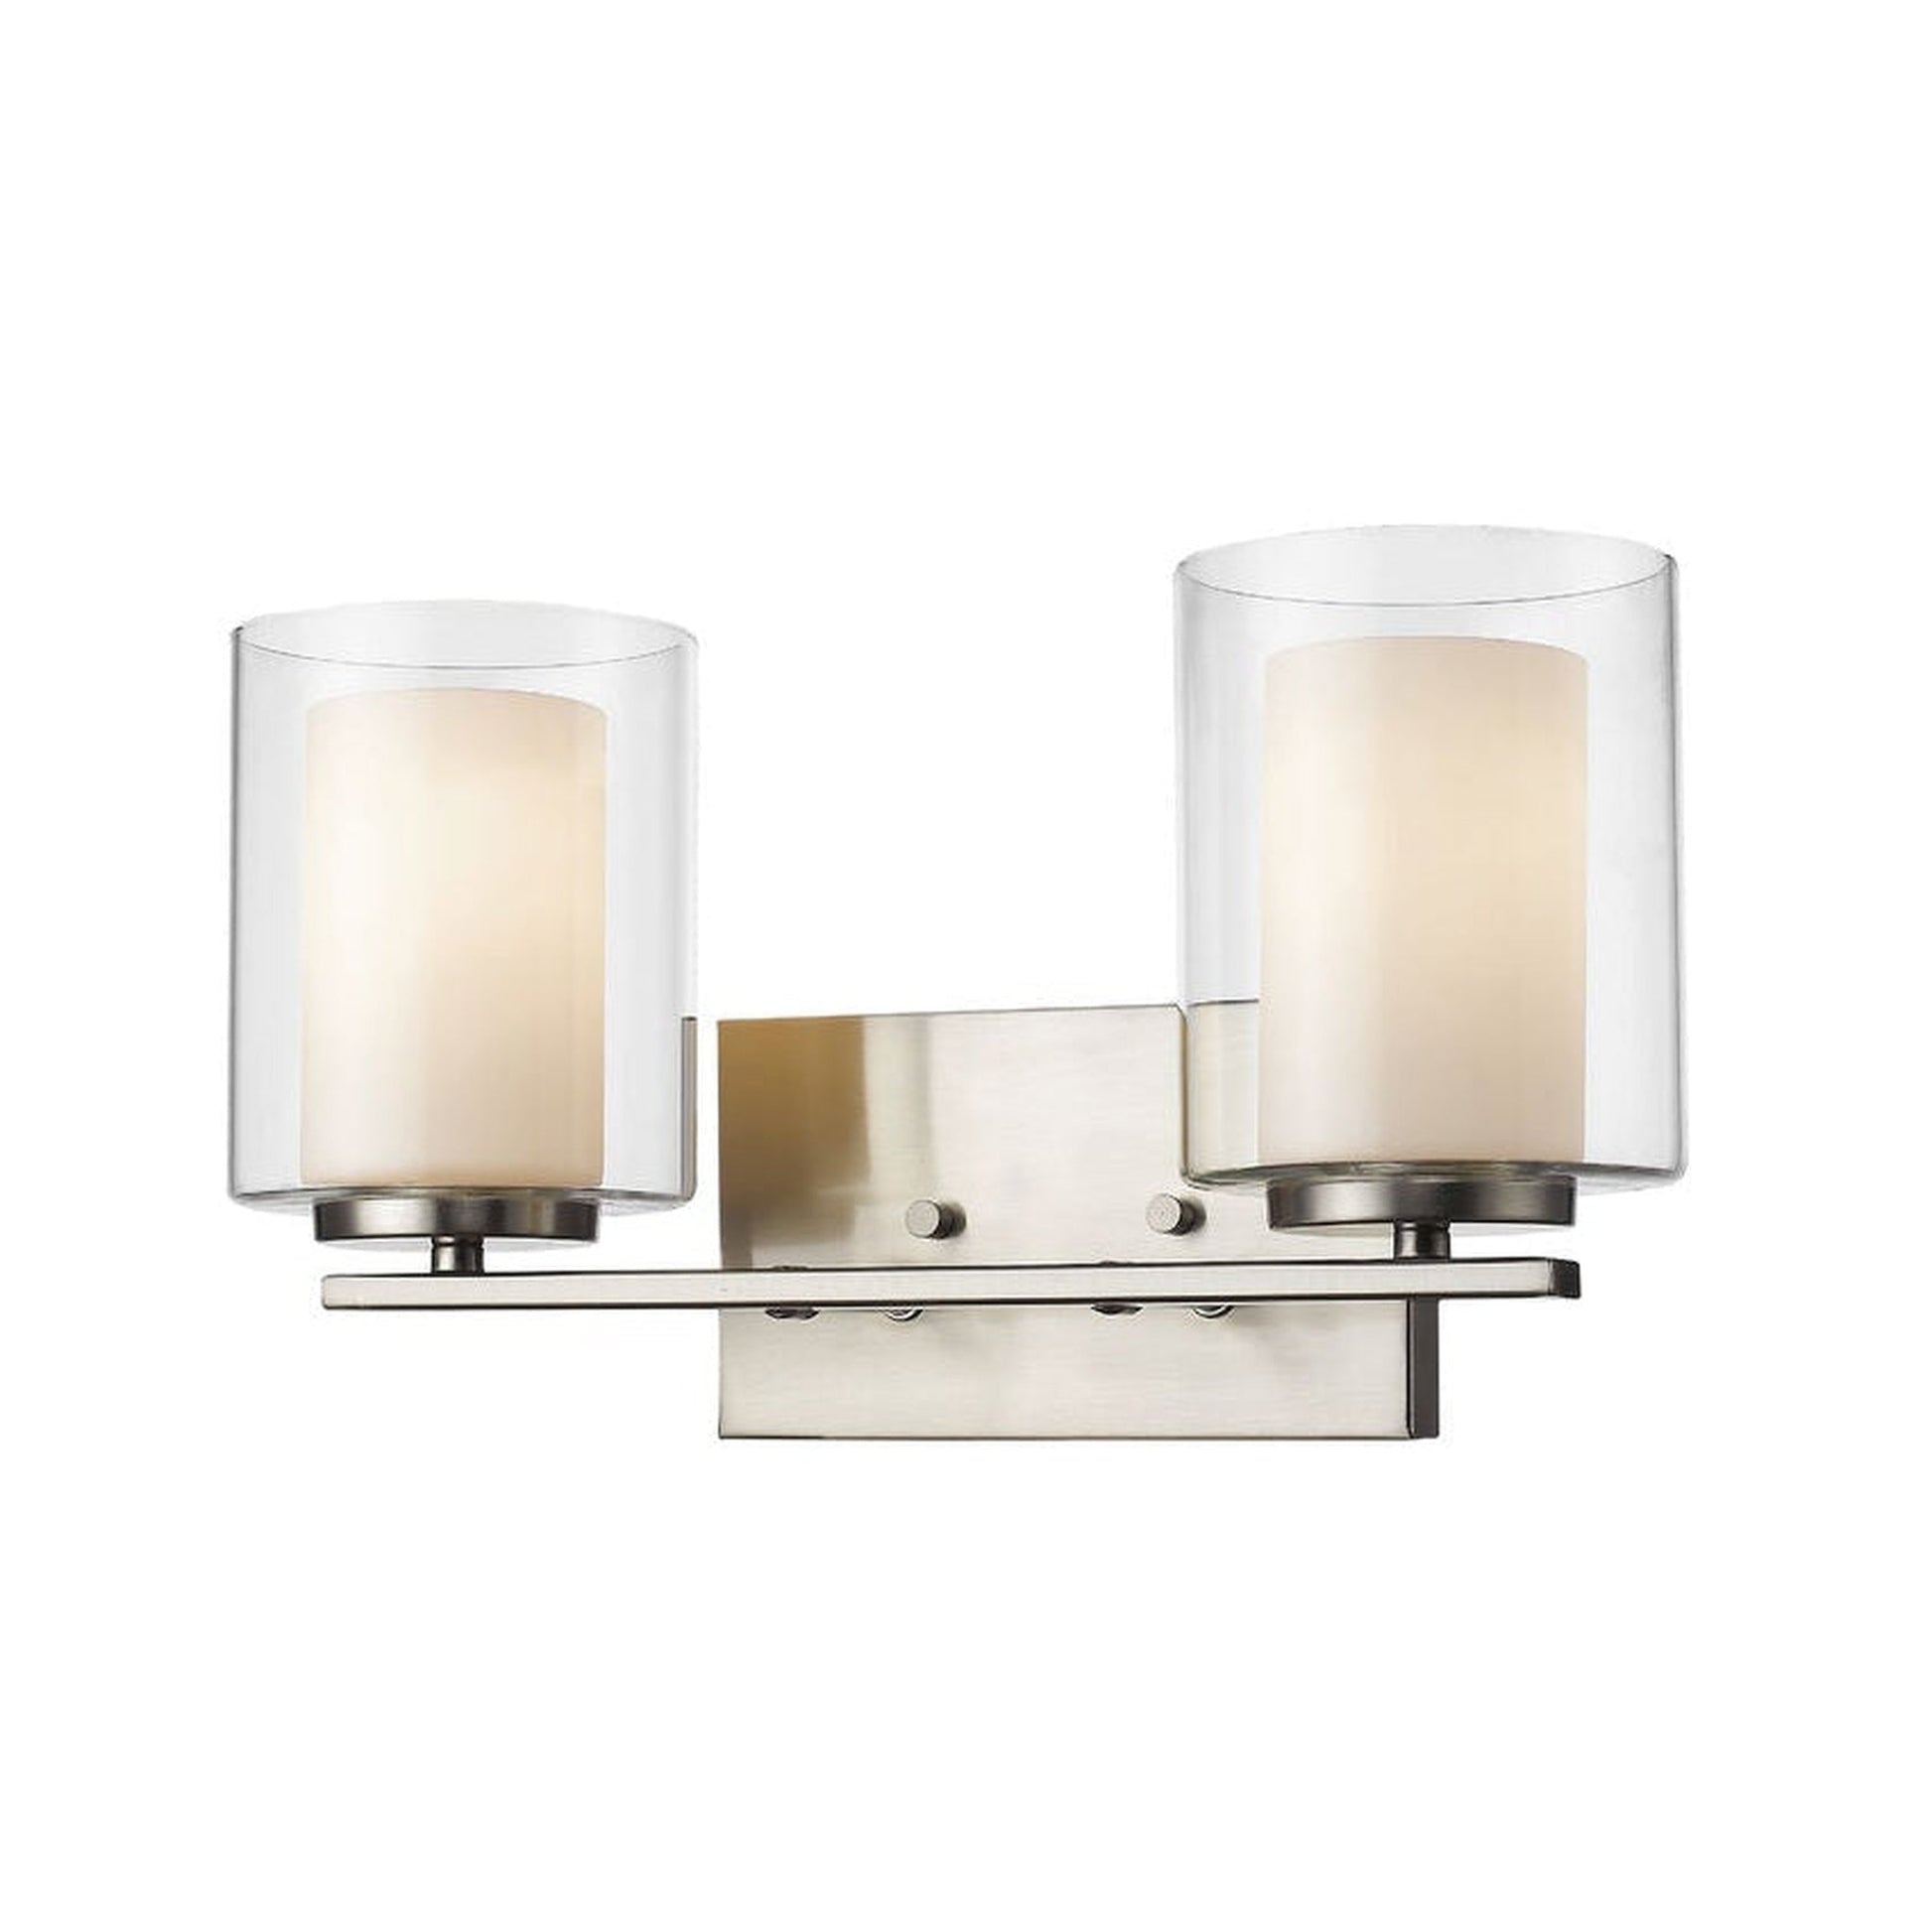 Z-Lite Willow 15" 2-Light Brushed Nickel Vanity Light With Clear and Matte Opal Glass Shade